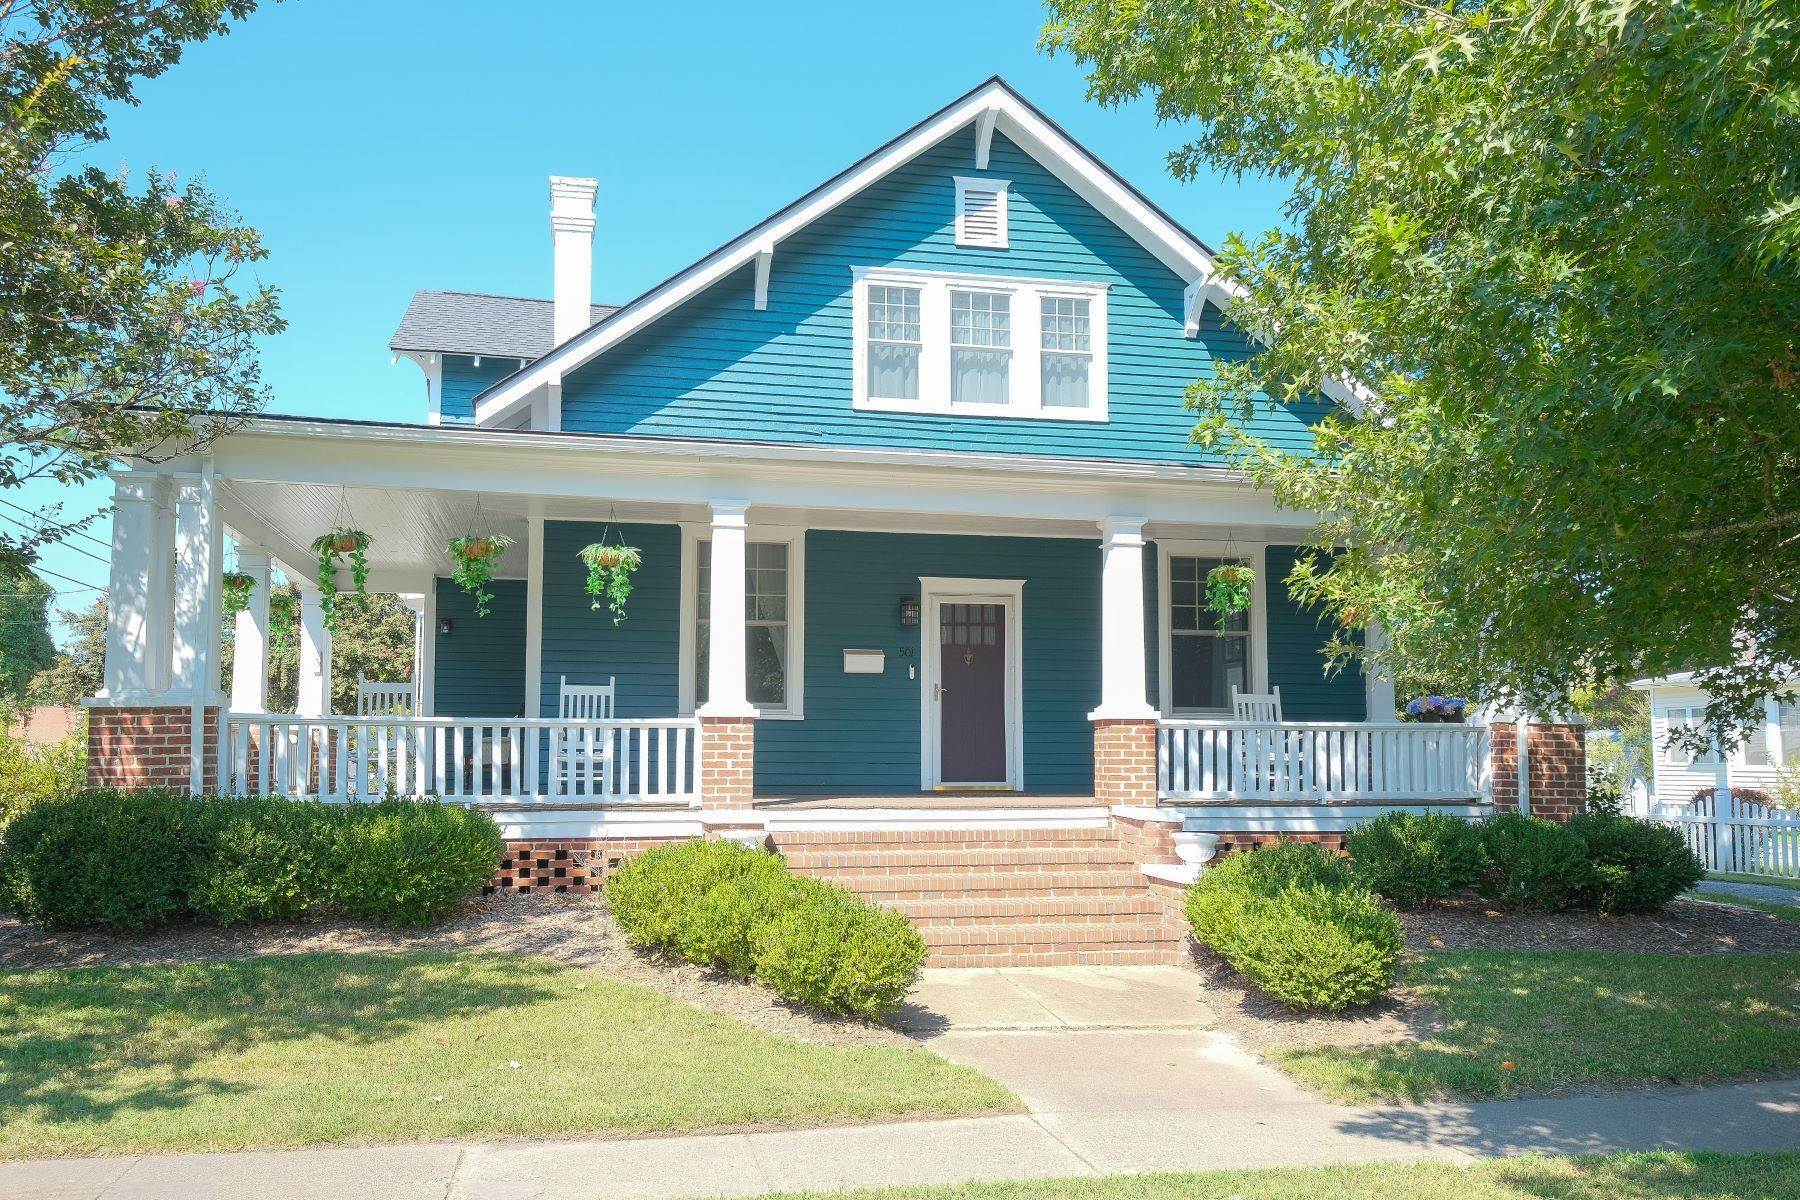 Single Family Homes for Sale at DOWNTOWN HISTORIC EDENTON 501 N Broad St Edenton, North Carolina 27932 United States